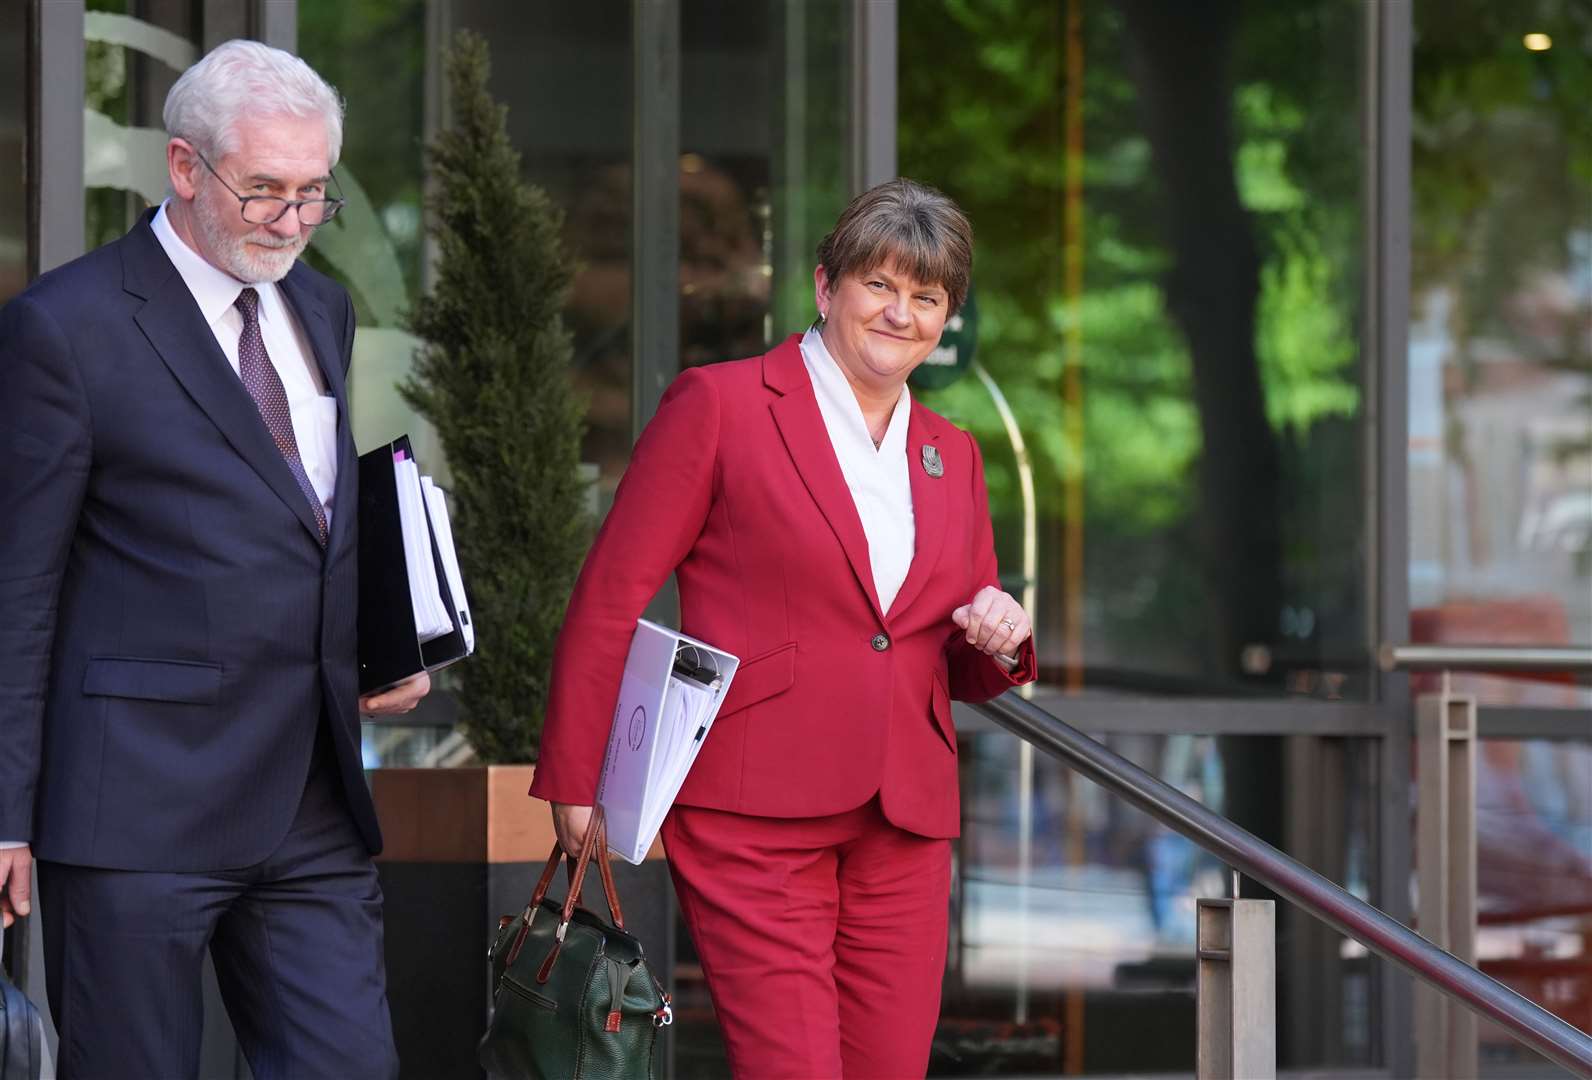 Baroness Arlene Foster leaving the Clayton Hotel in Belfast after giving evidence to the UK Covid-19 inquiry hearing (Niall Carson/PA).